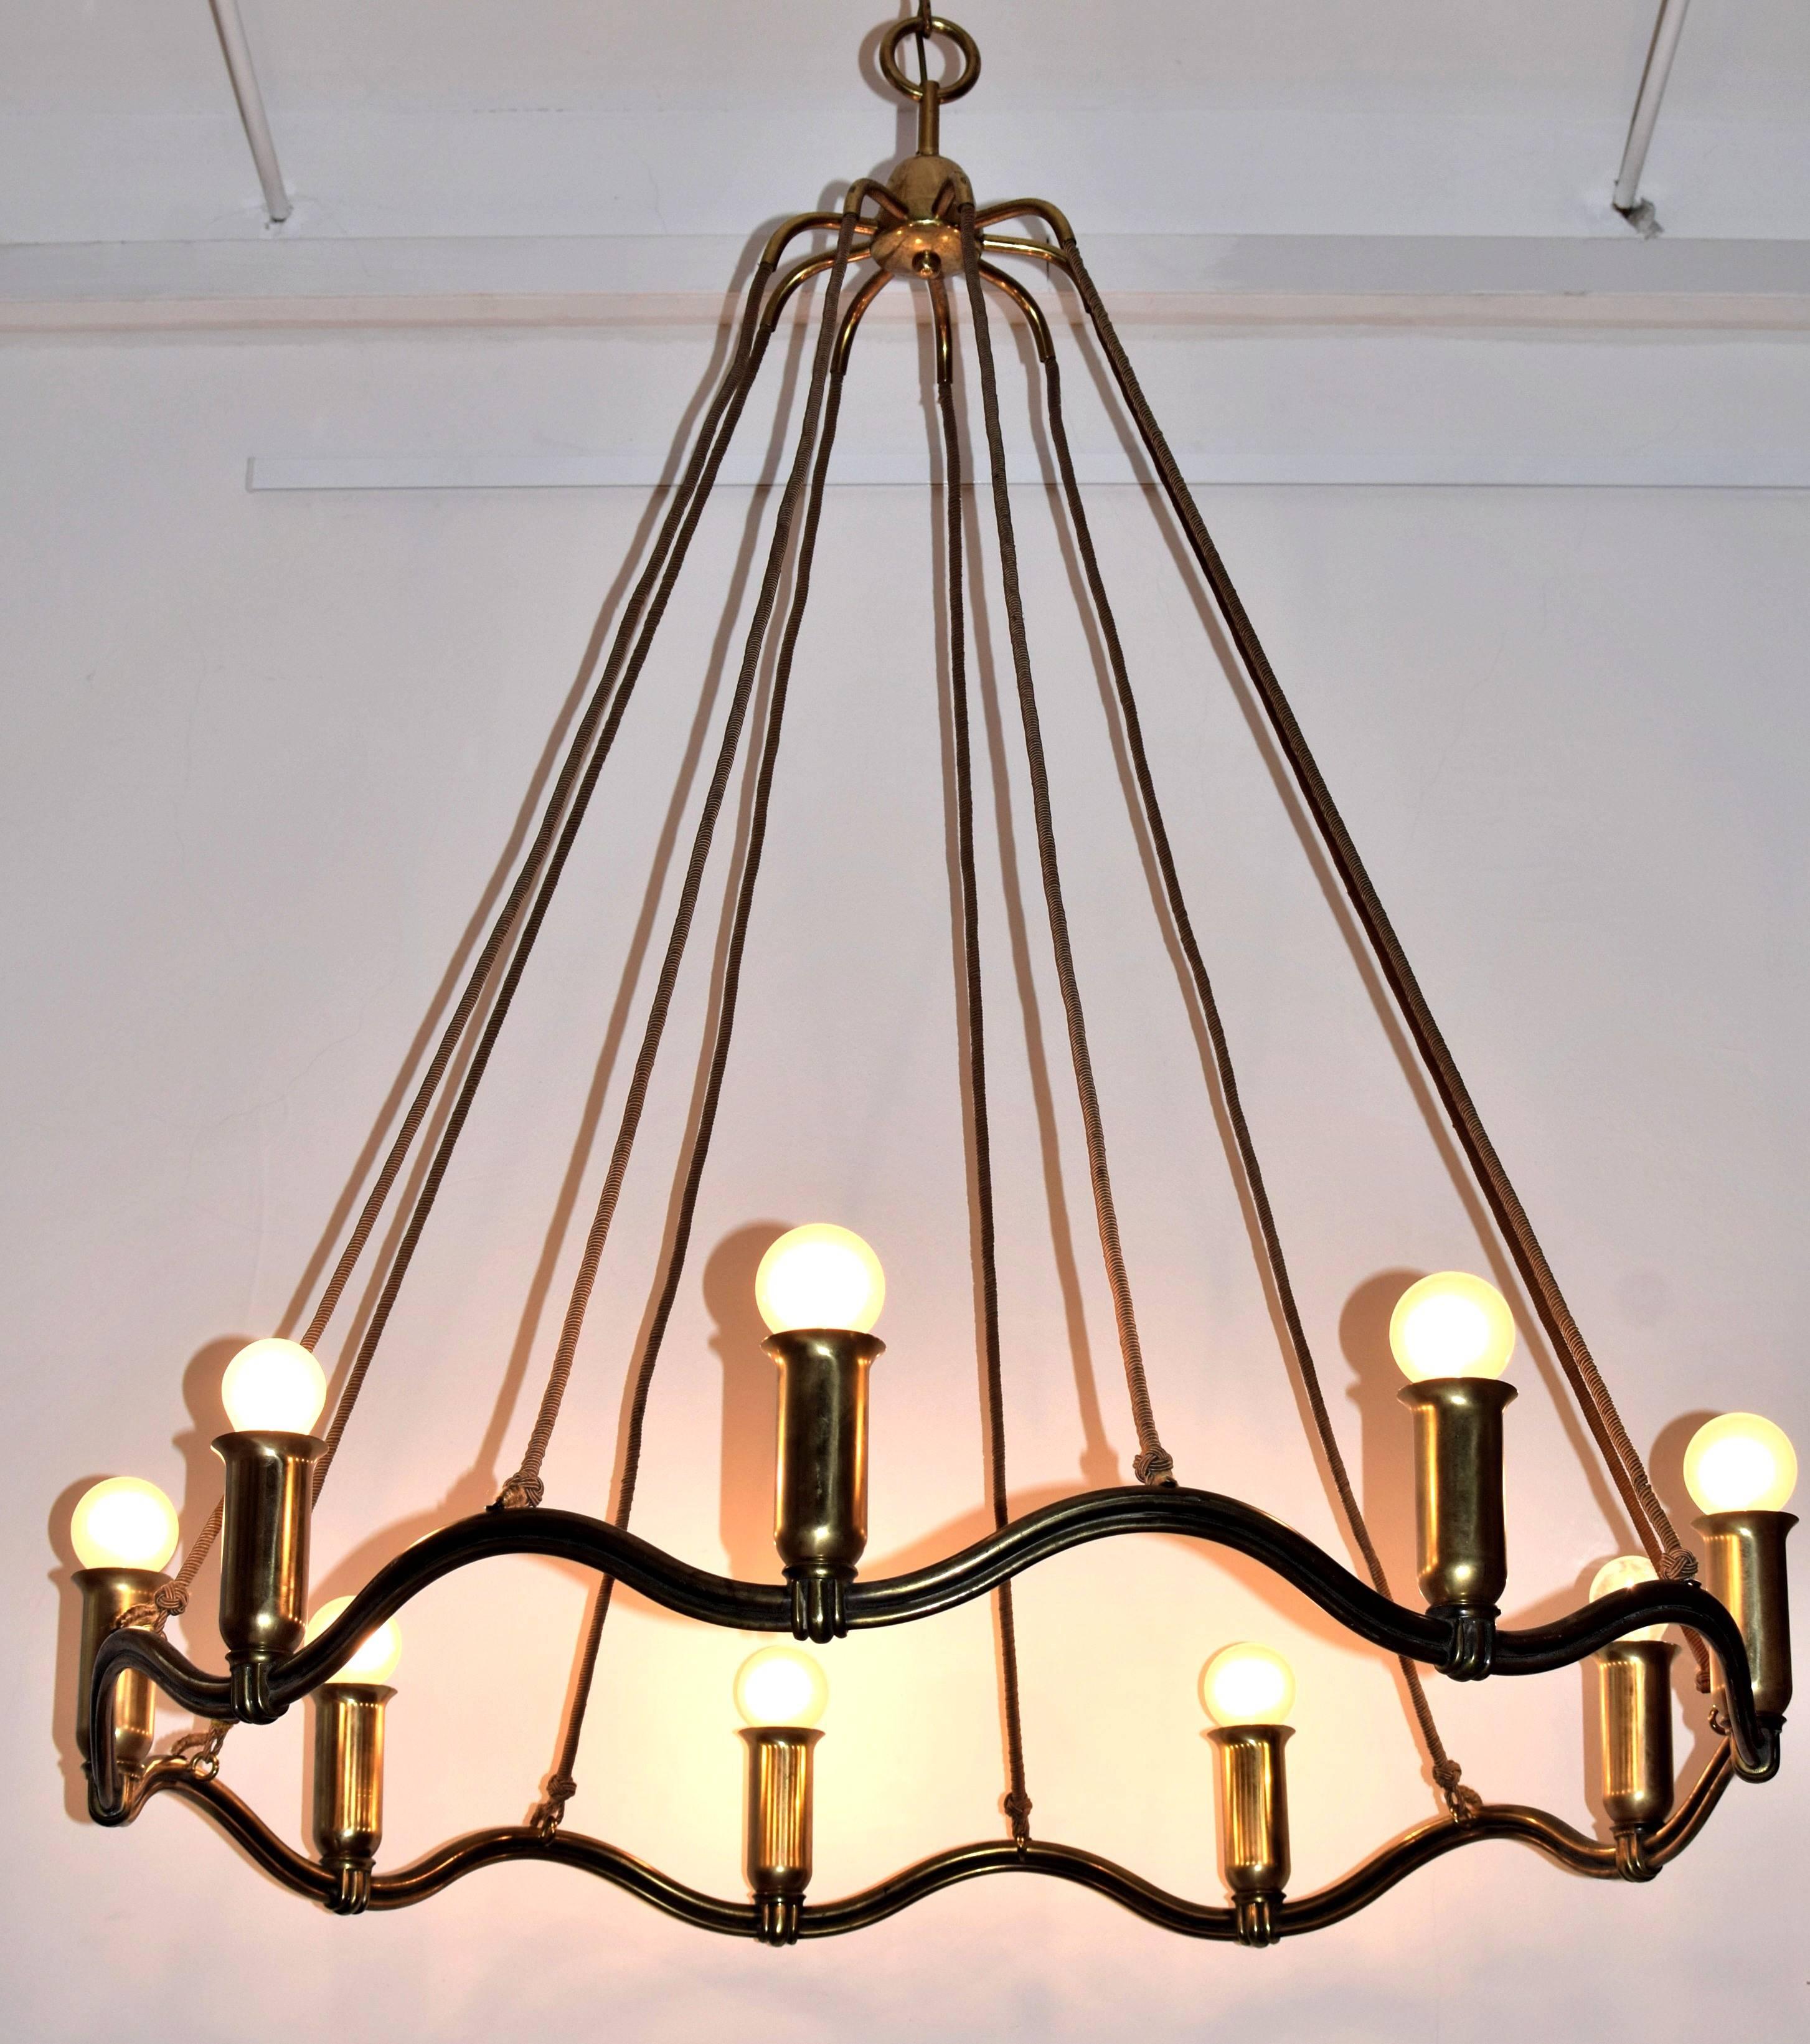 Extra Large Wave-Shaped Ceiling Light, 1930s, Hugo Gorge Attributed For Sale 2